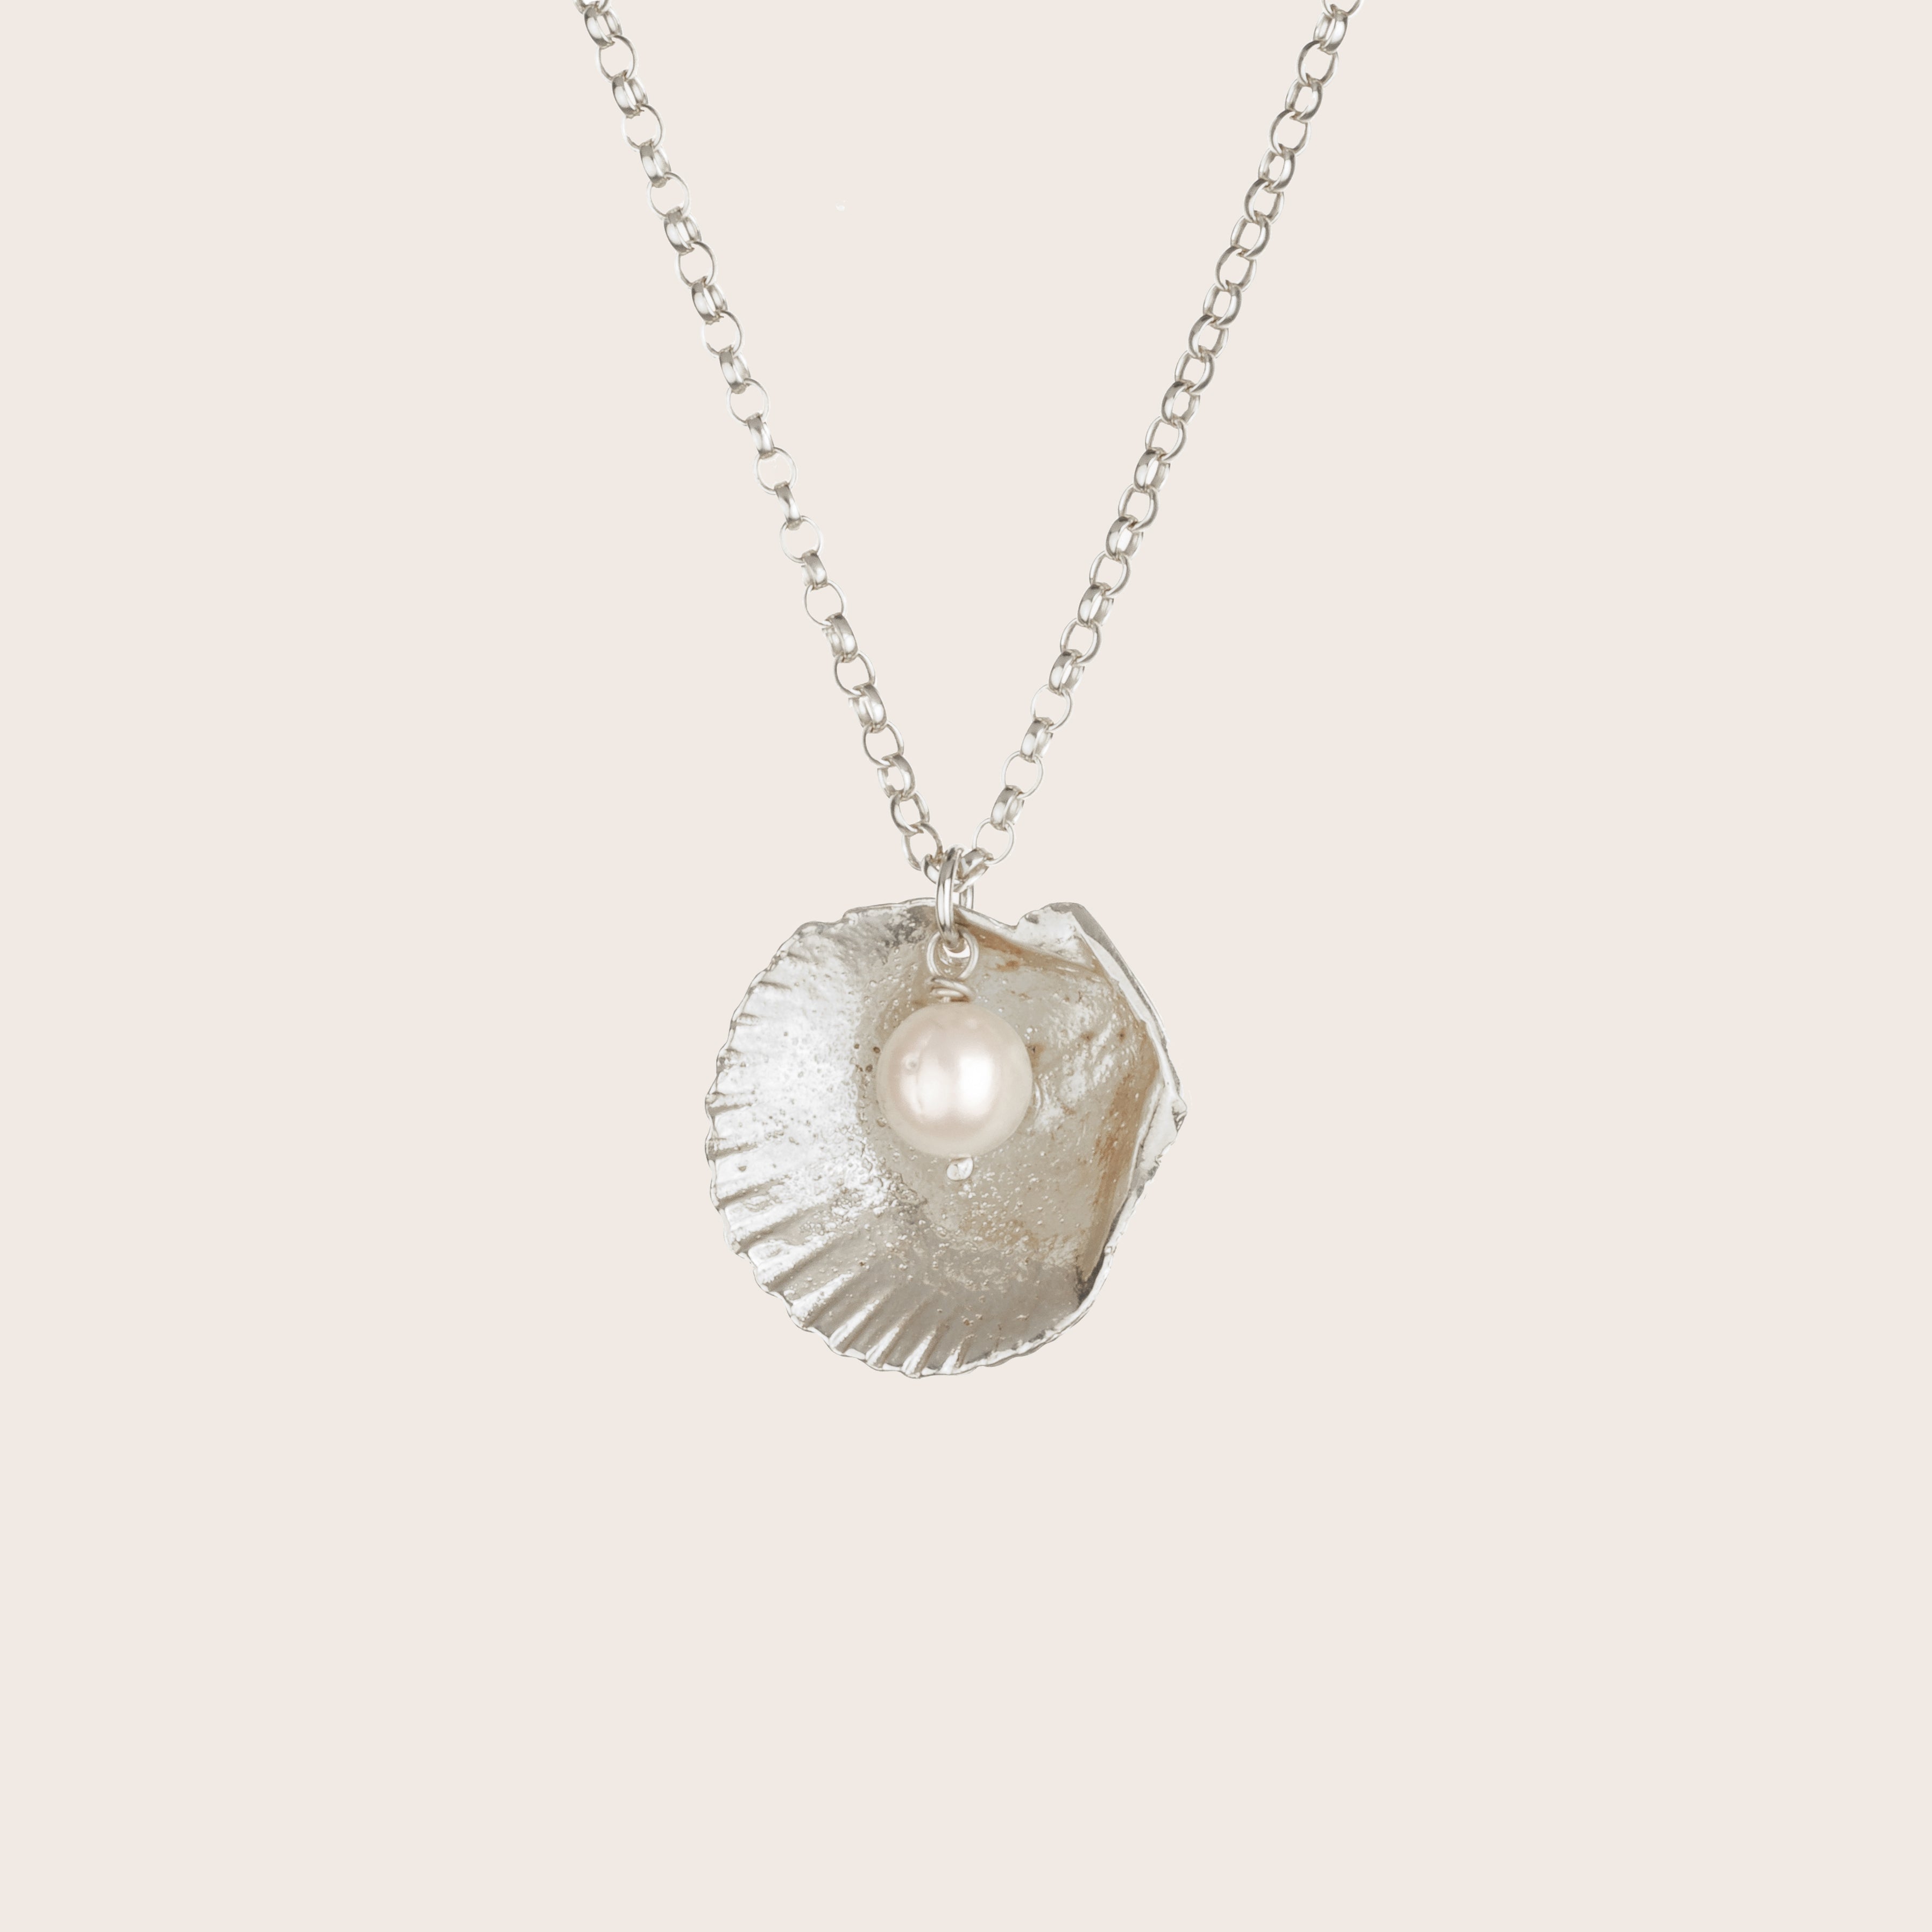 Saba Shell with Pearl Necklace - harryrockslondon